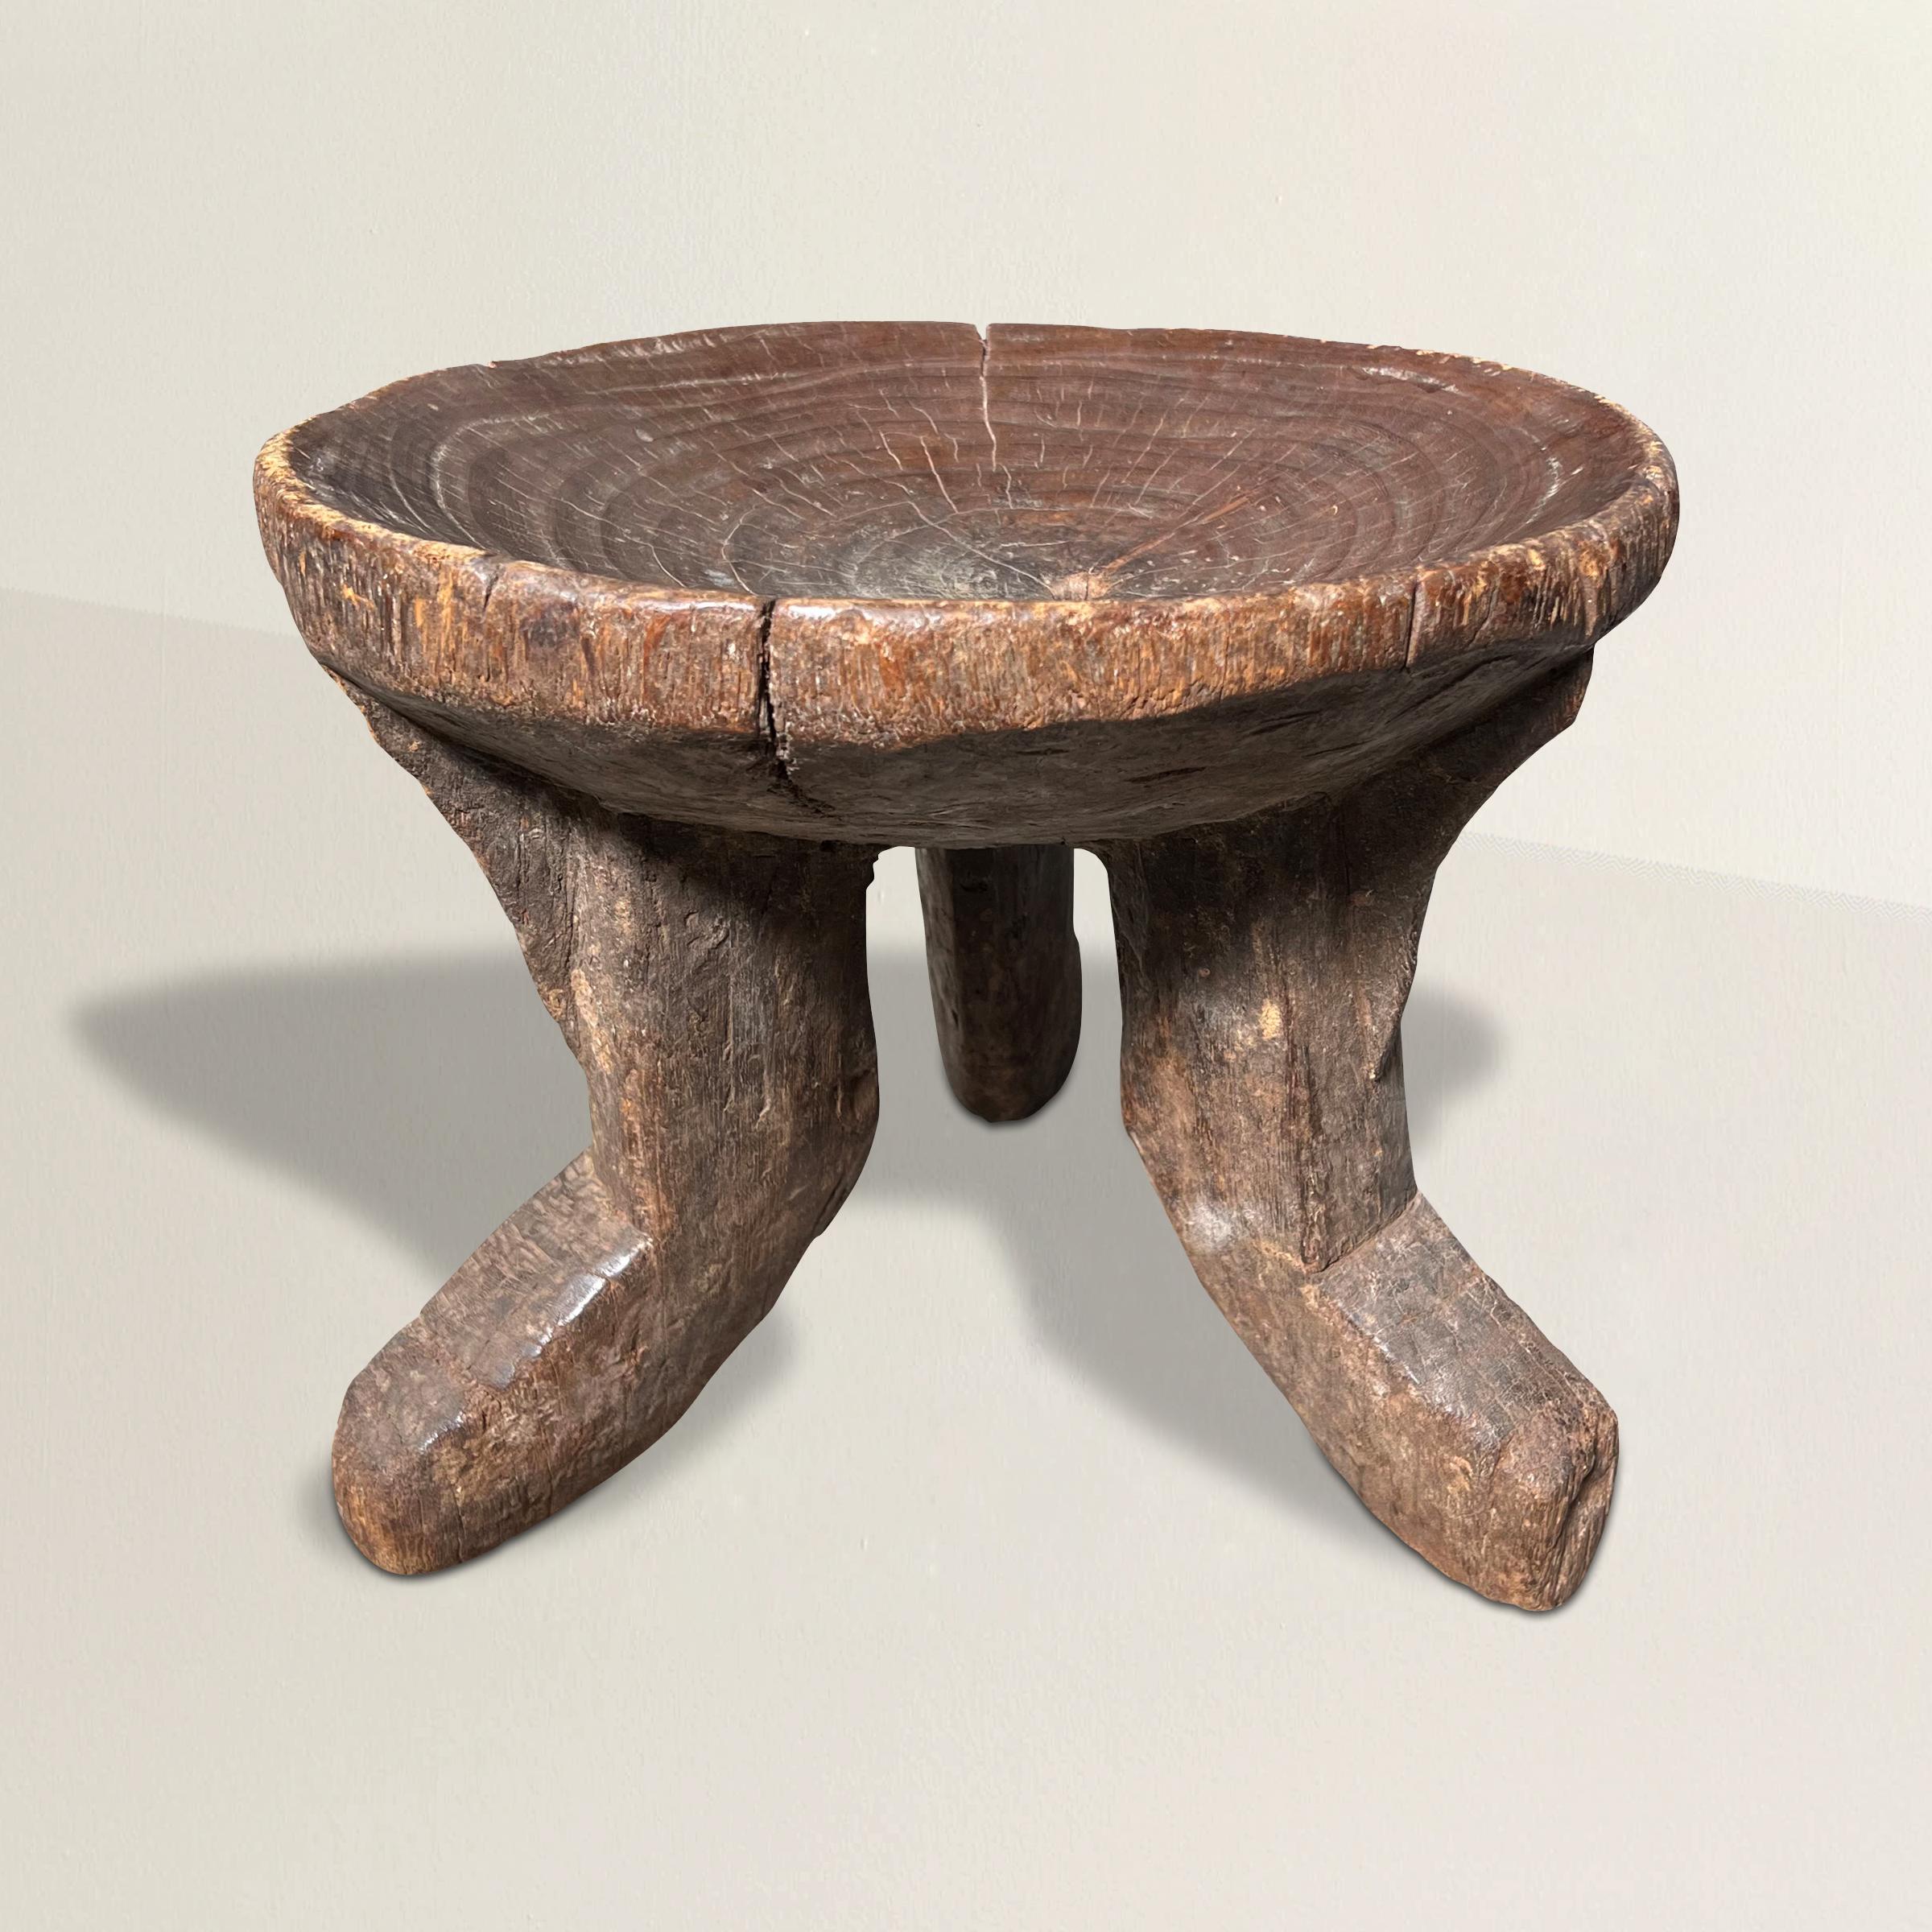 A wonderfully sculptural early 20th century Ethiopian stool from the Gurage Peoples, carved of one piece of wood with the most wonderful texture, and with three curved legs supporting a convex bowl-form seat with a natural knot in the center and a